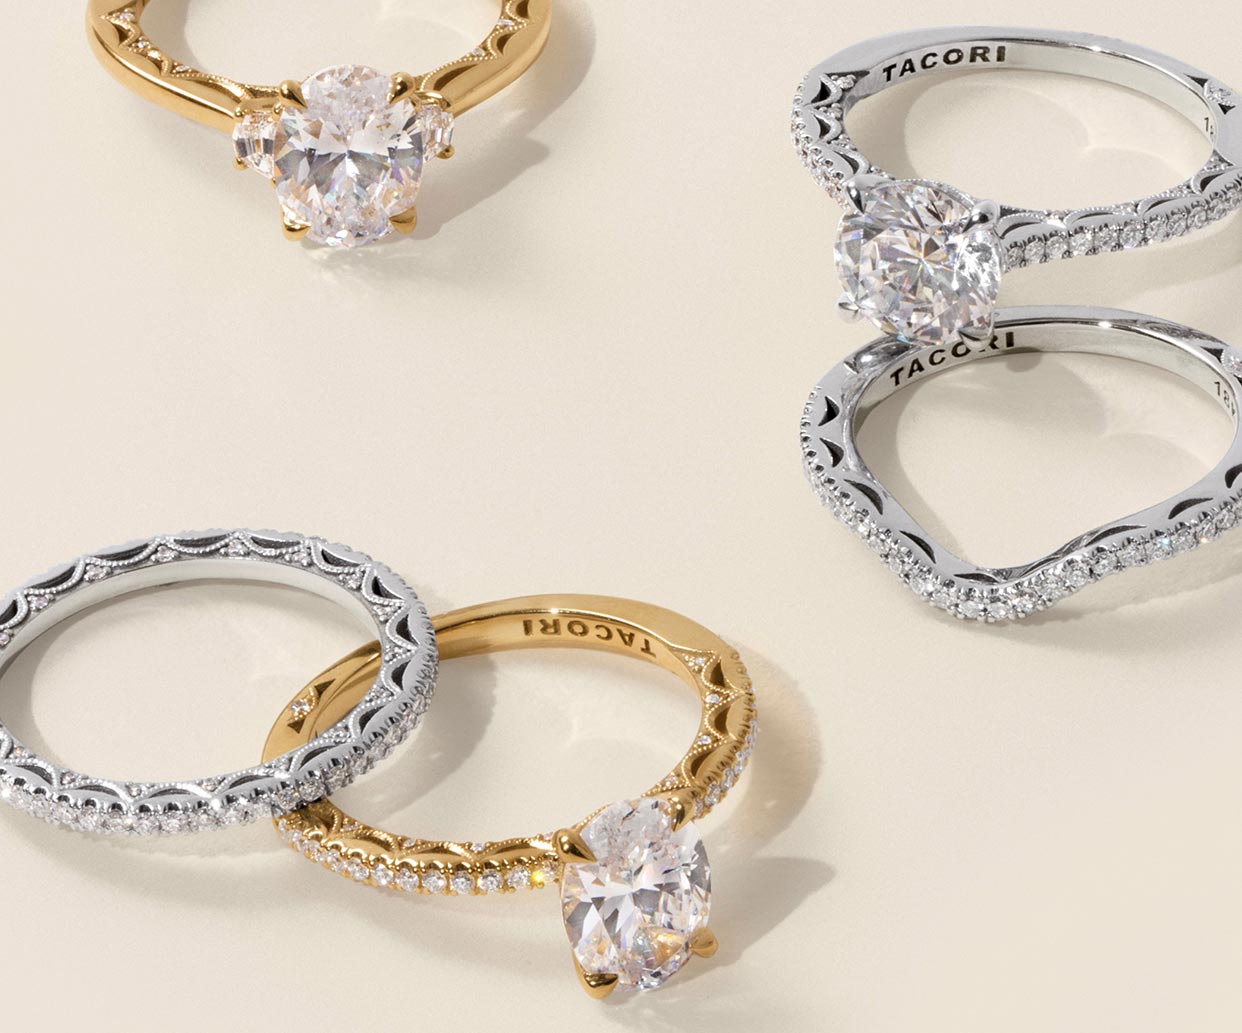 Variety of diamond engagement rings and wedding rings from the Tacori collection.